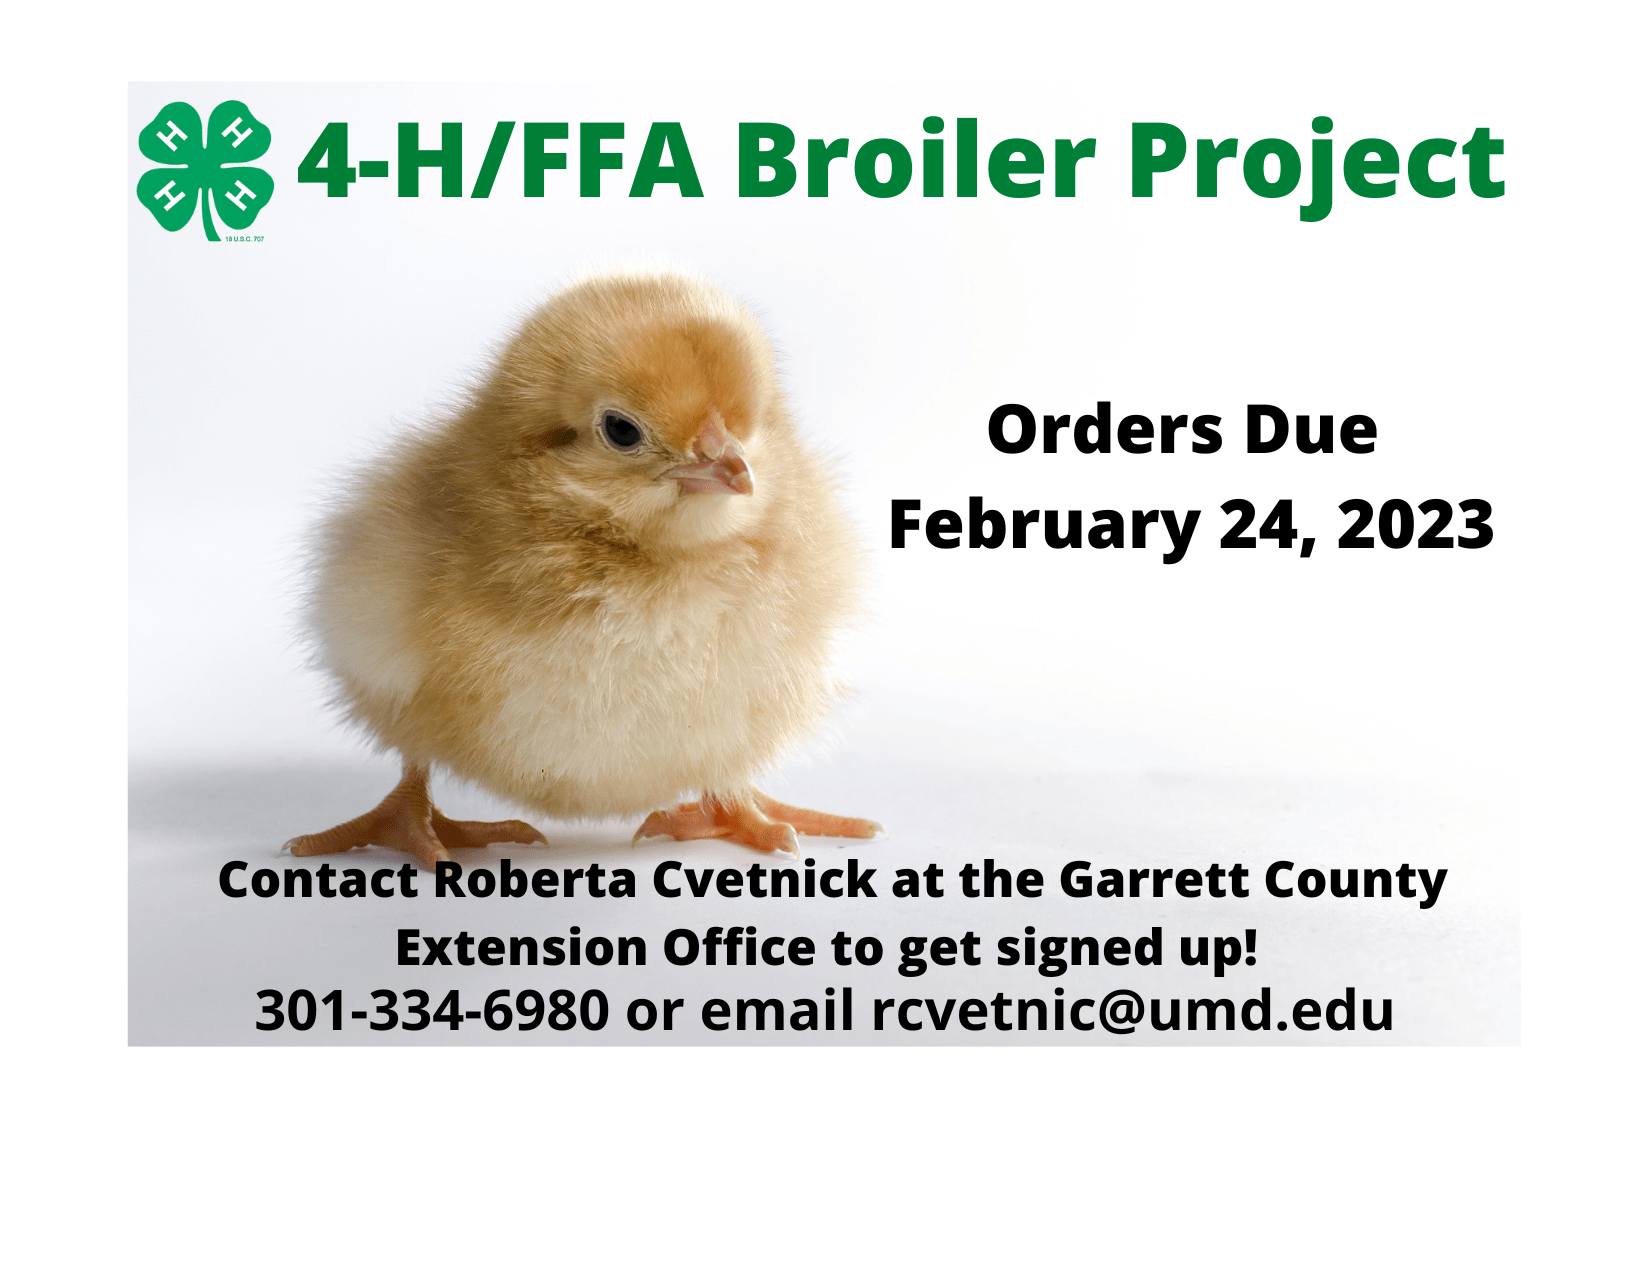 2023 Broiler Show Due Date